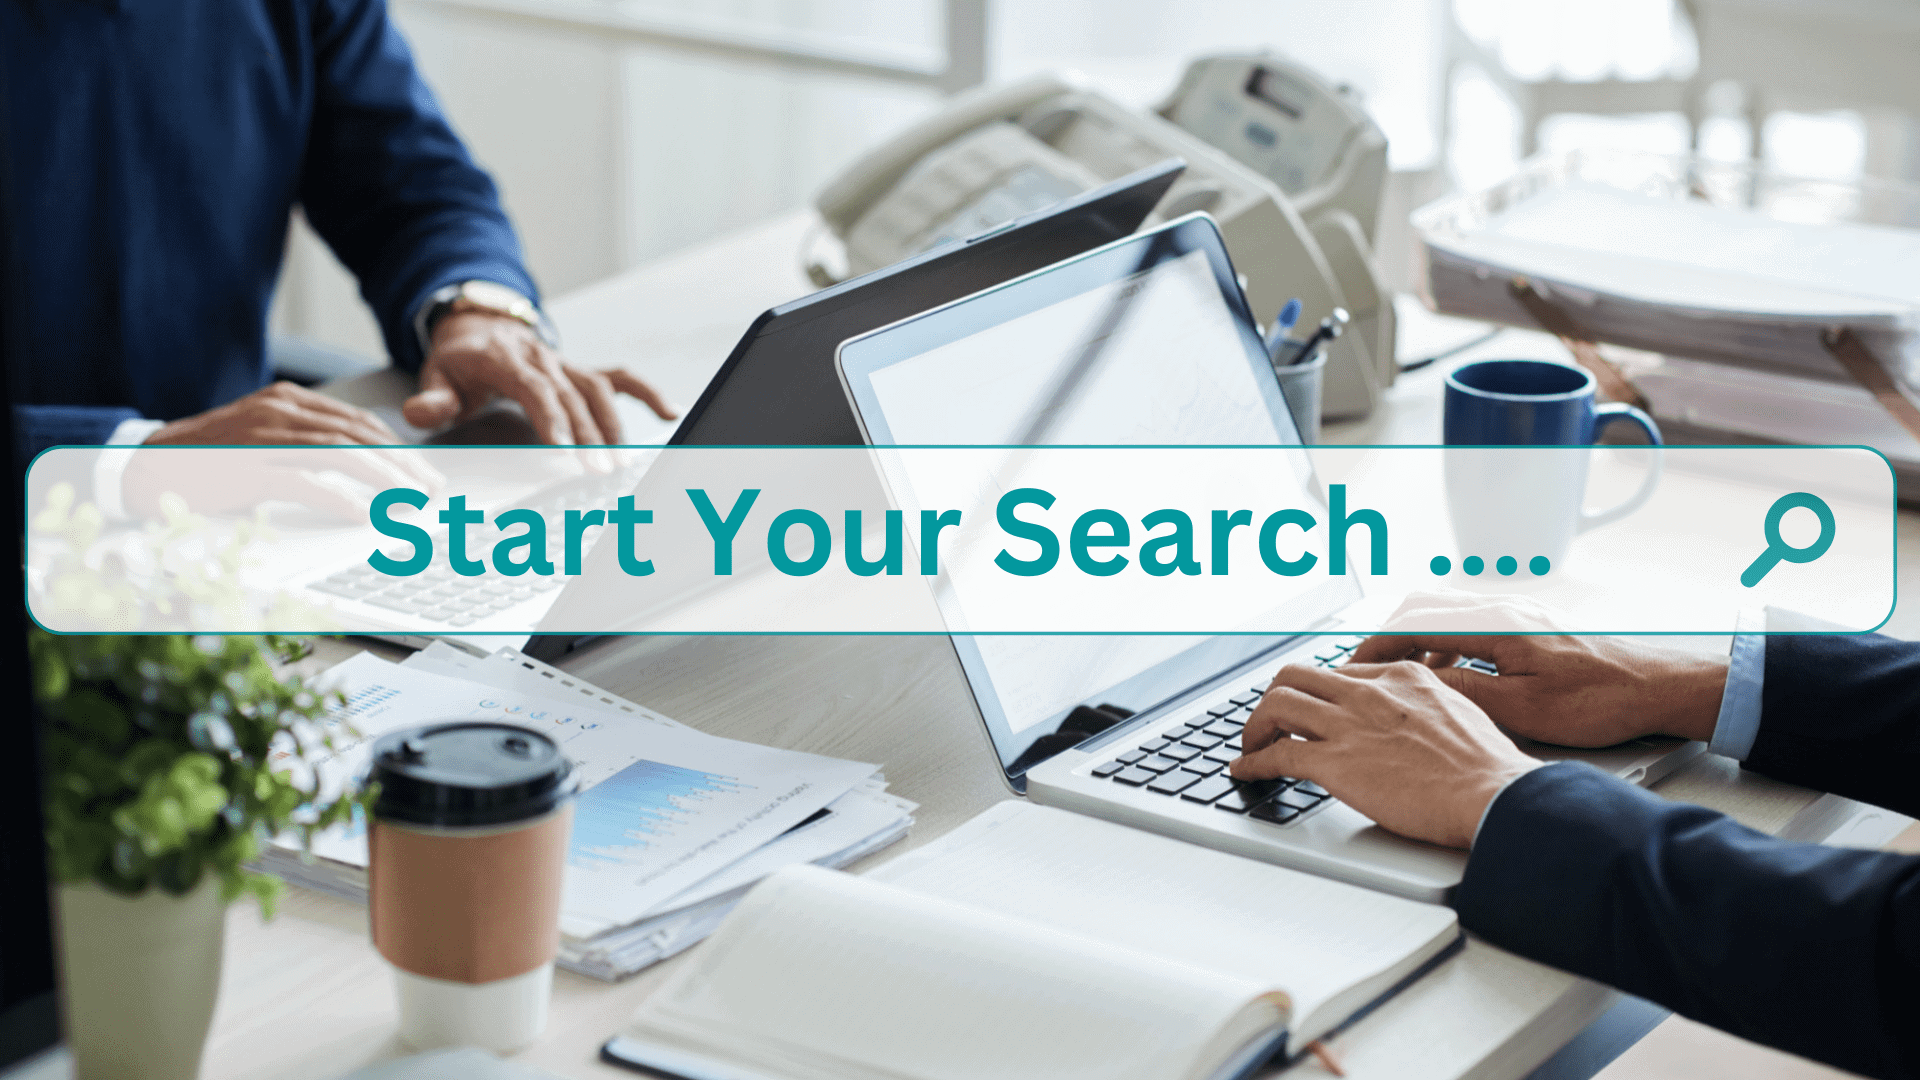 Top 100 Search Engines List